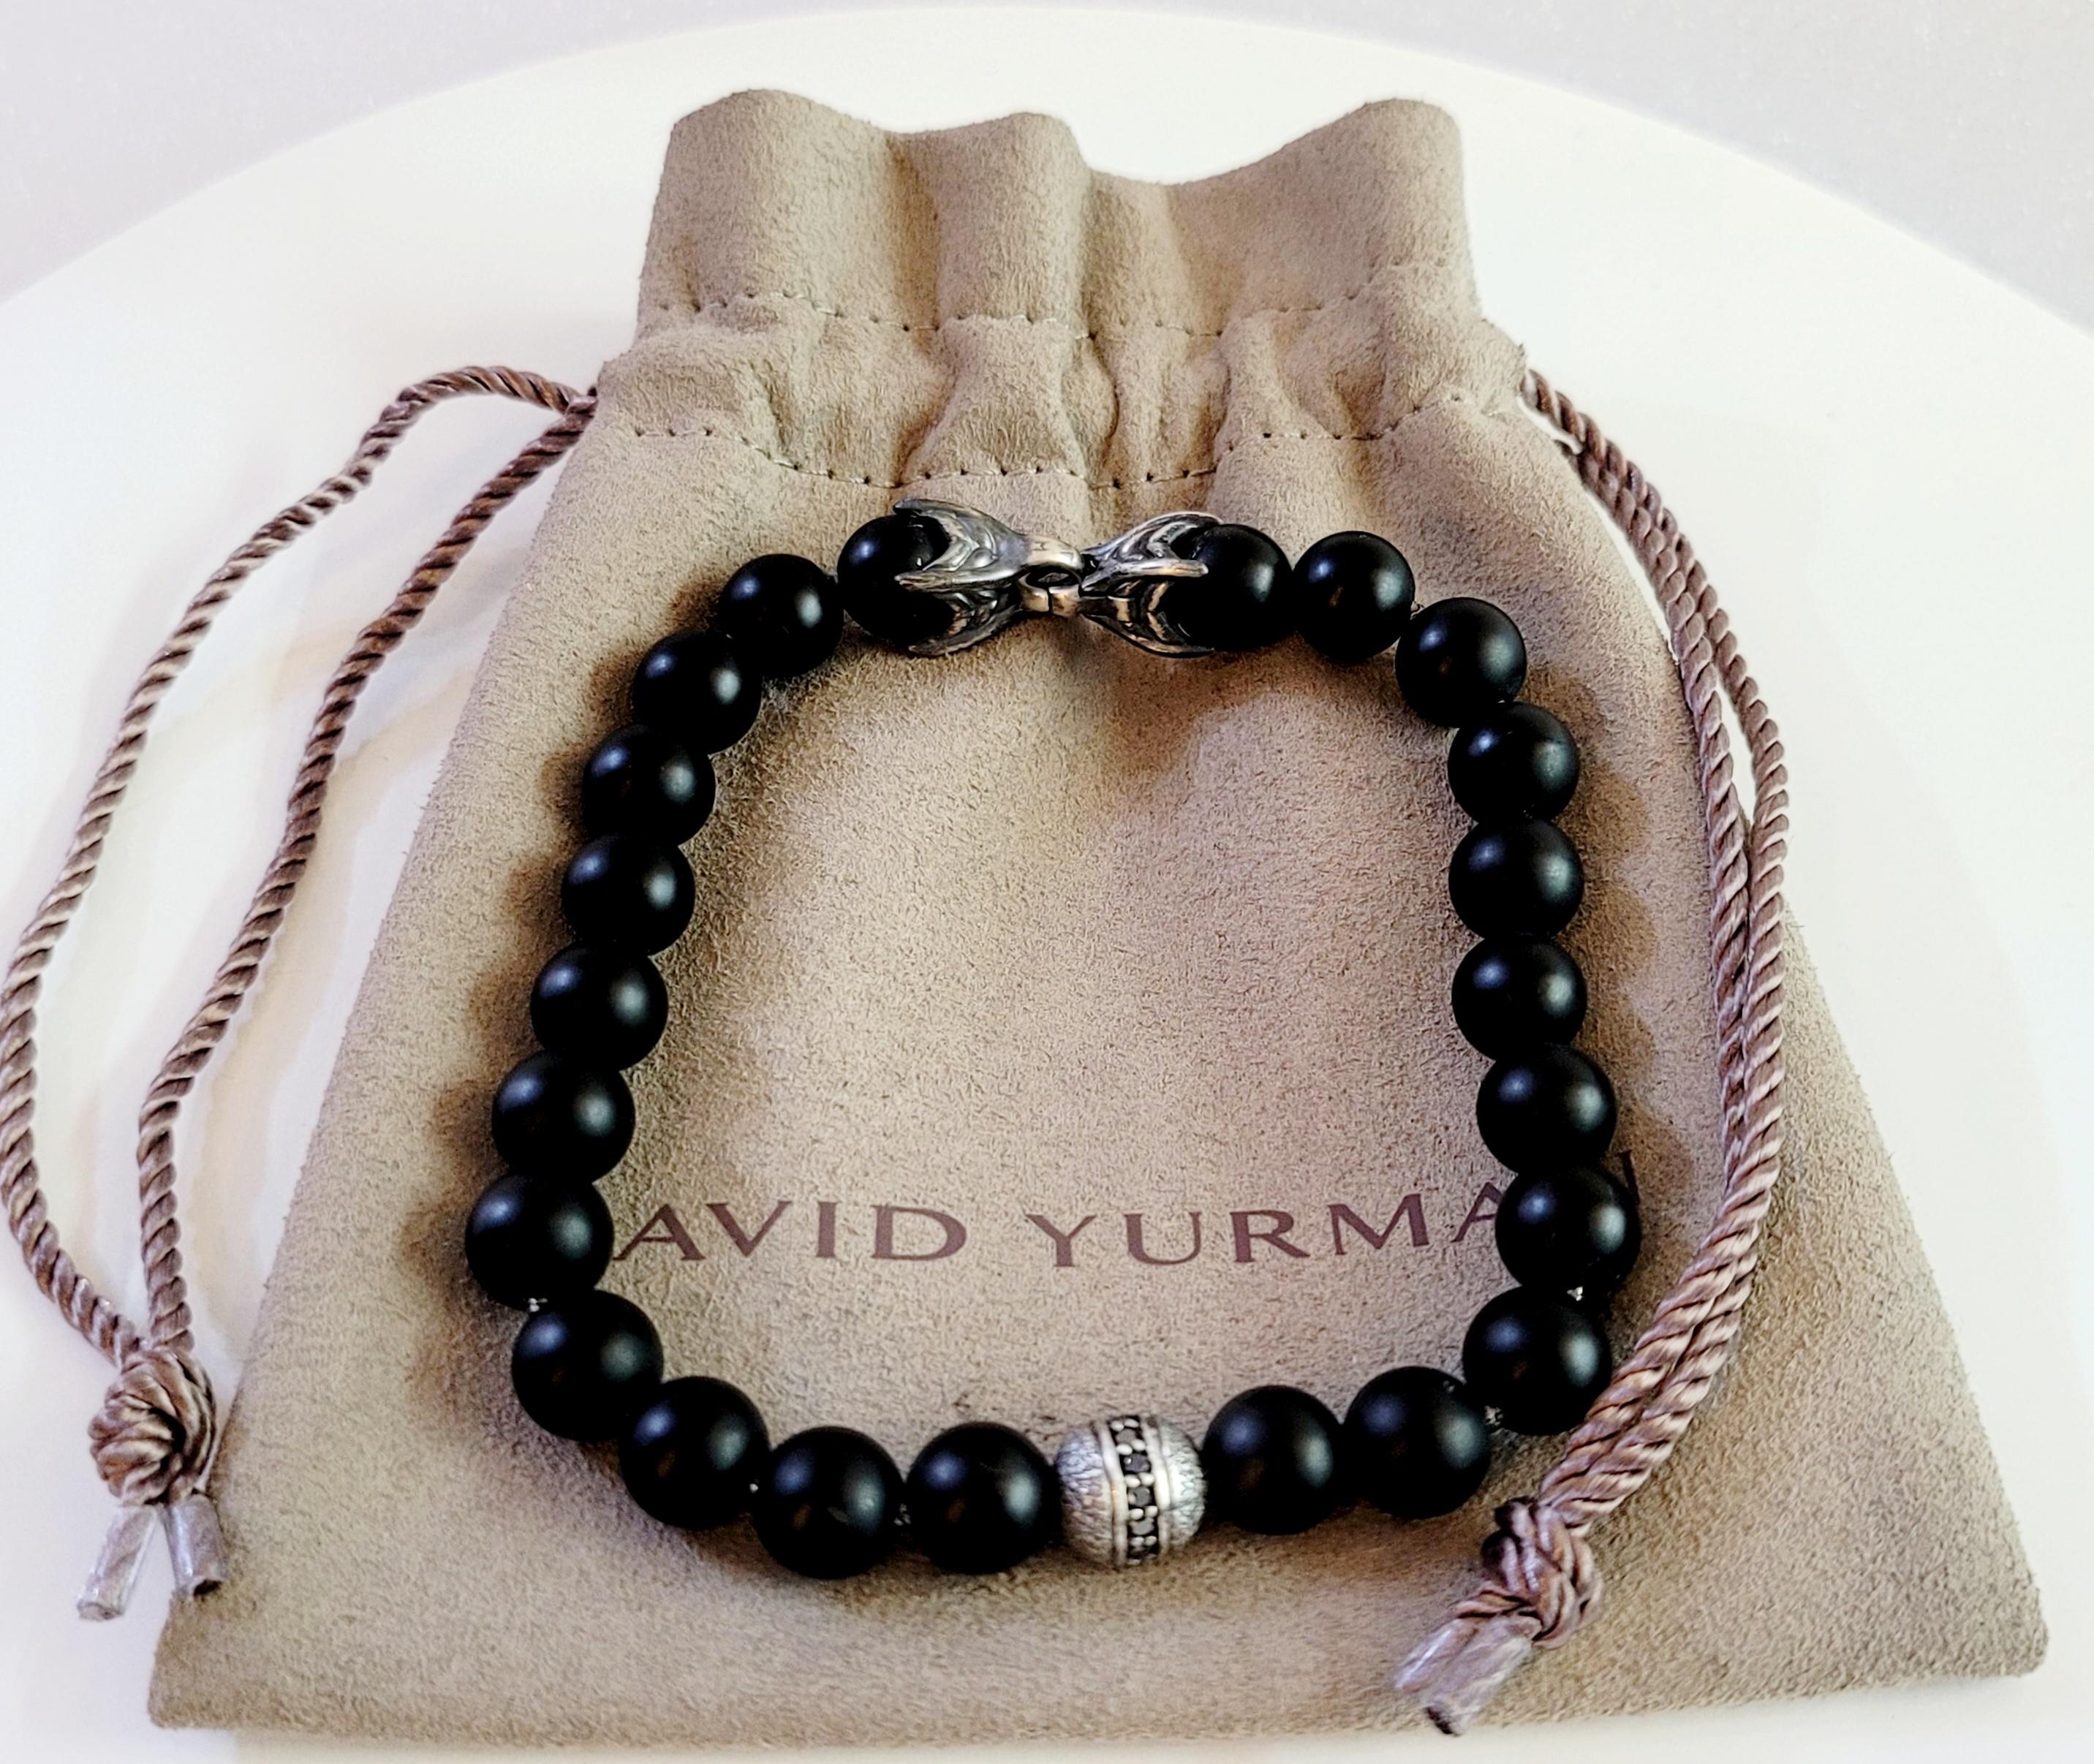 Round Cut David Yurman Spiritual Beads Bracelet with Black Onyx in Sterling Silver For Sale